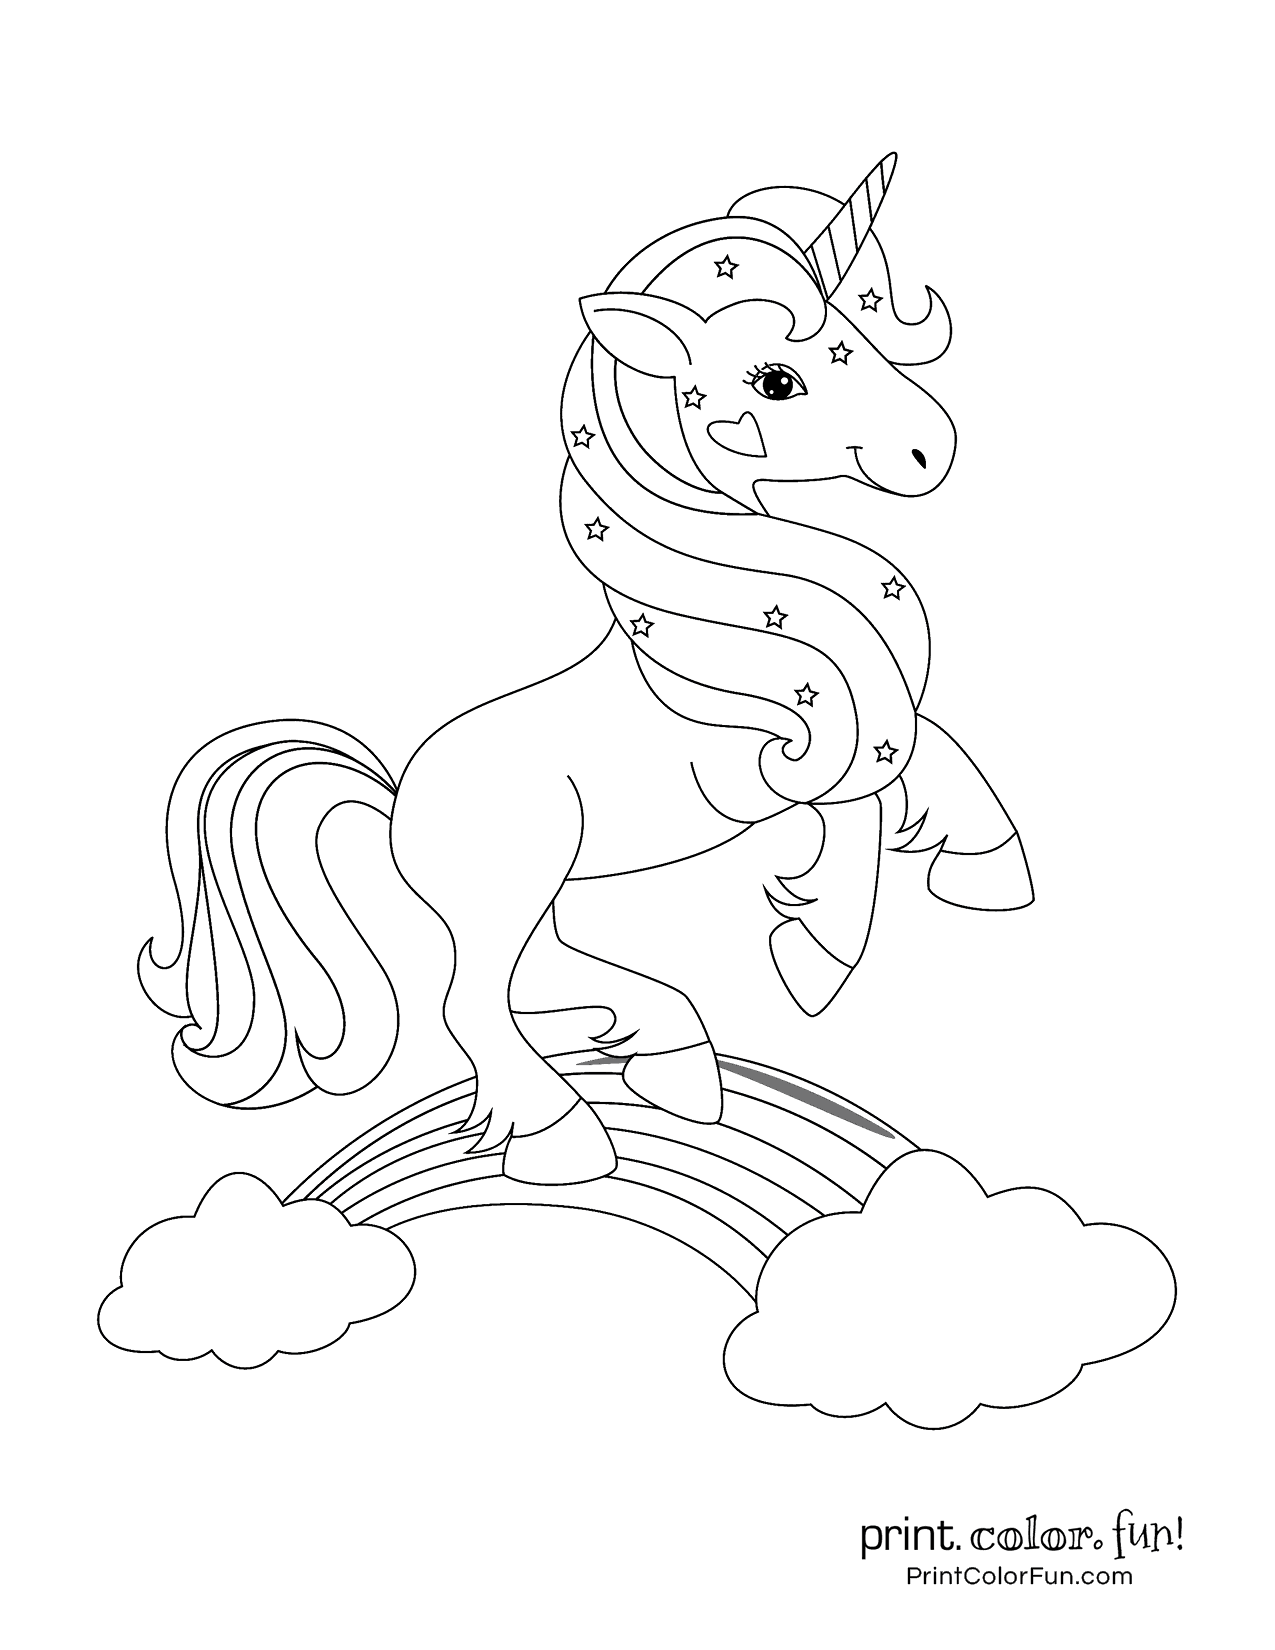 Top 100 Magical Unicorn Coloring Pages The Ultimate free Printable Collection Print Color